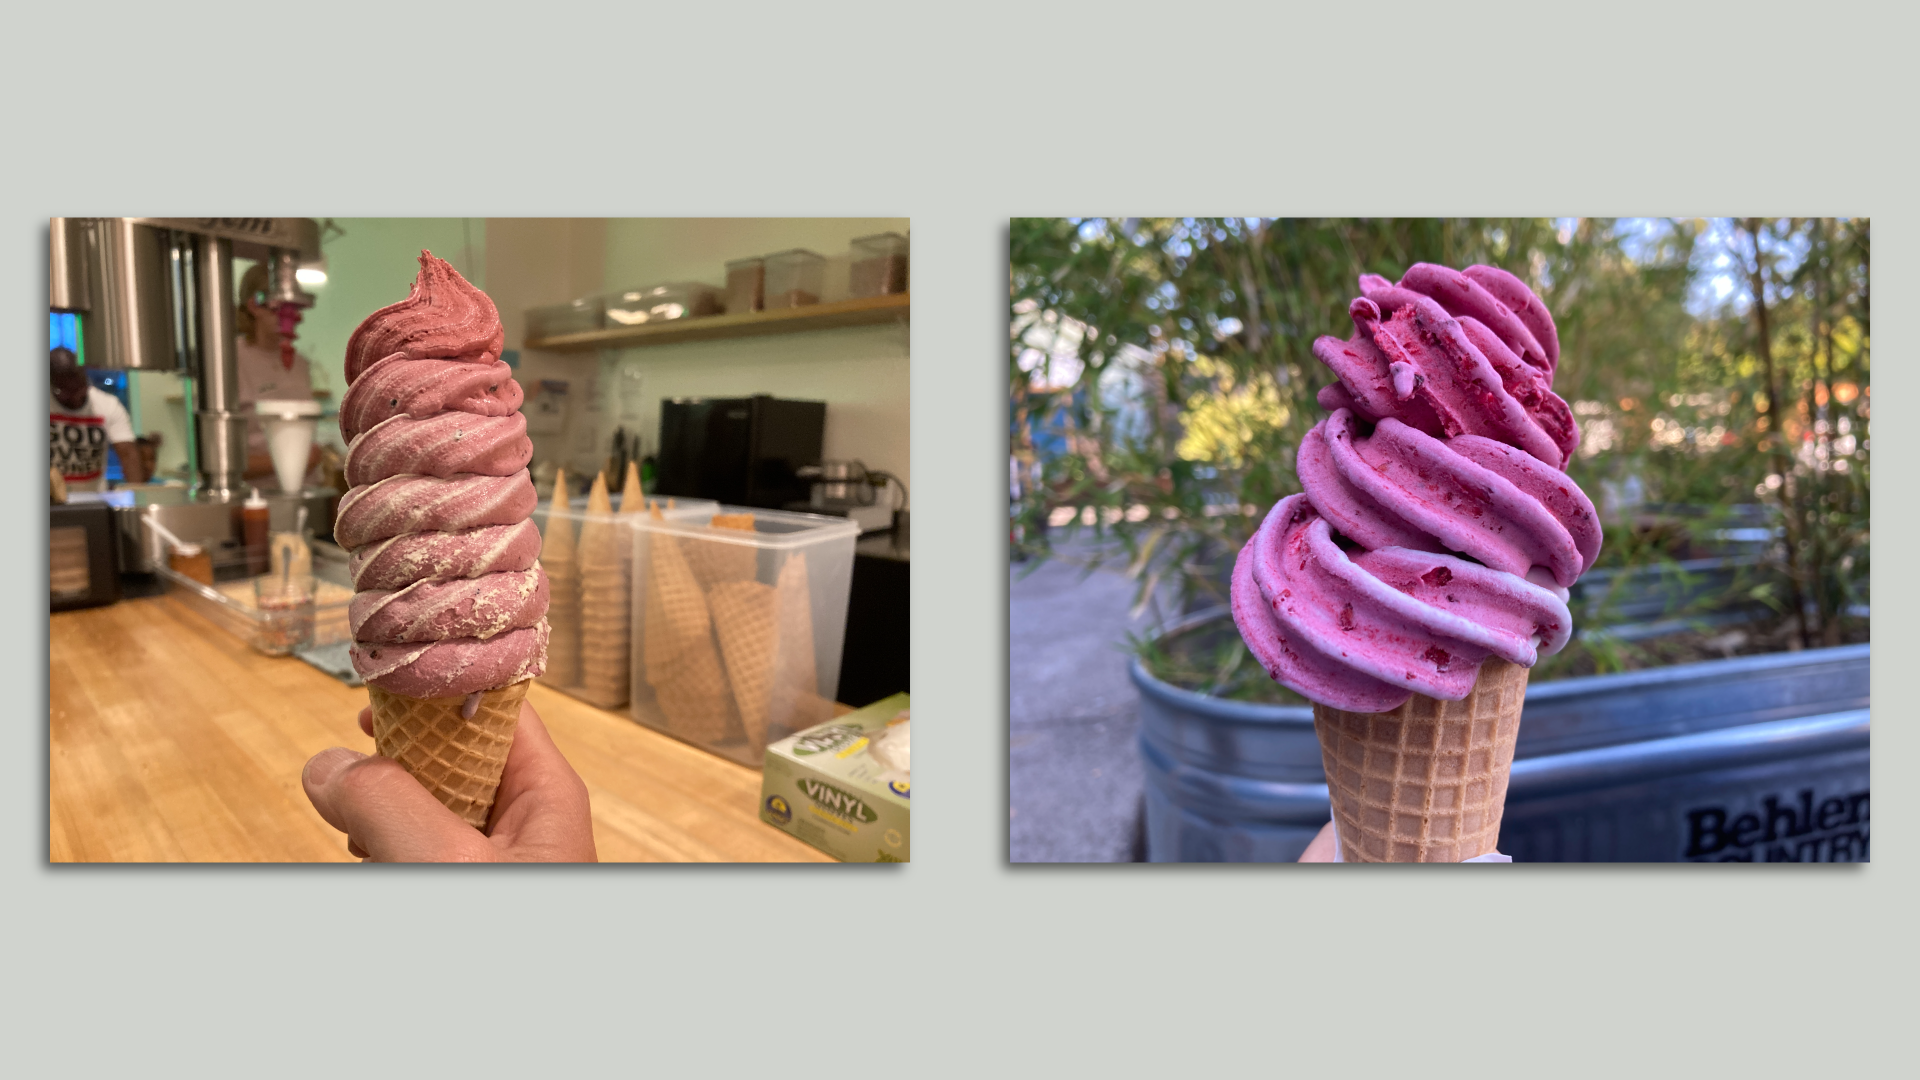 Two pictures of similar soft serve ice cream cones side by side. The one on the left is taller and lighter pink, the one on the right is shorter and bright magenta.